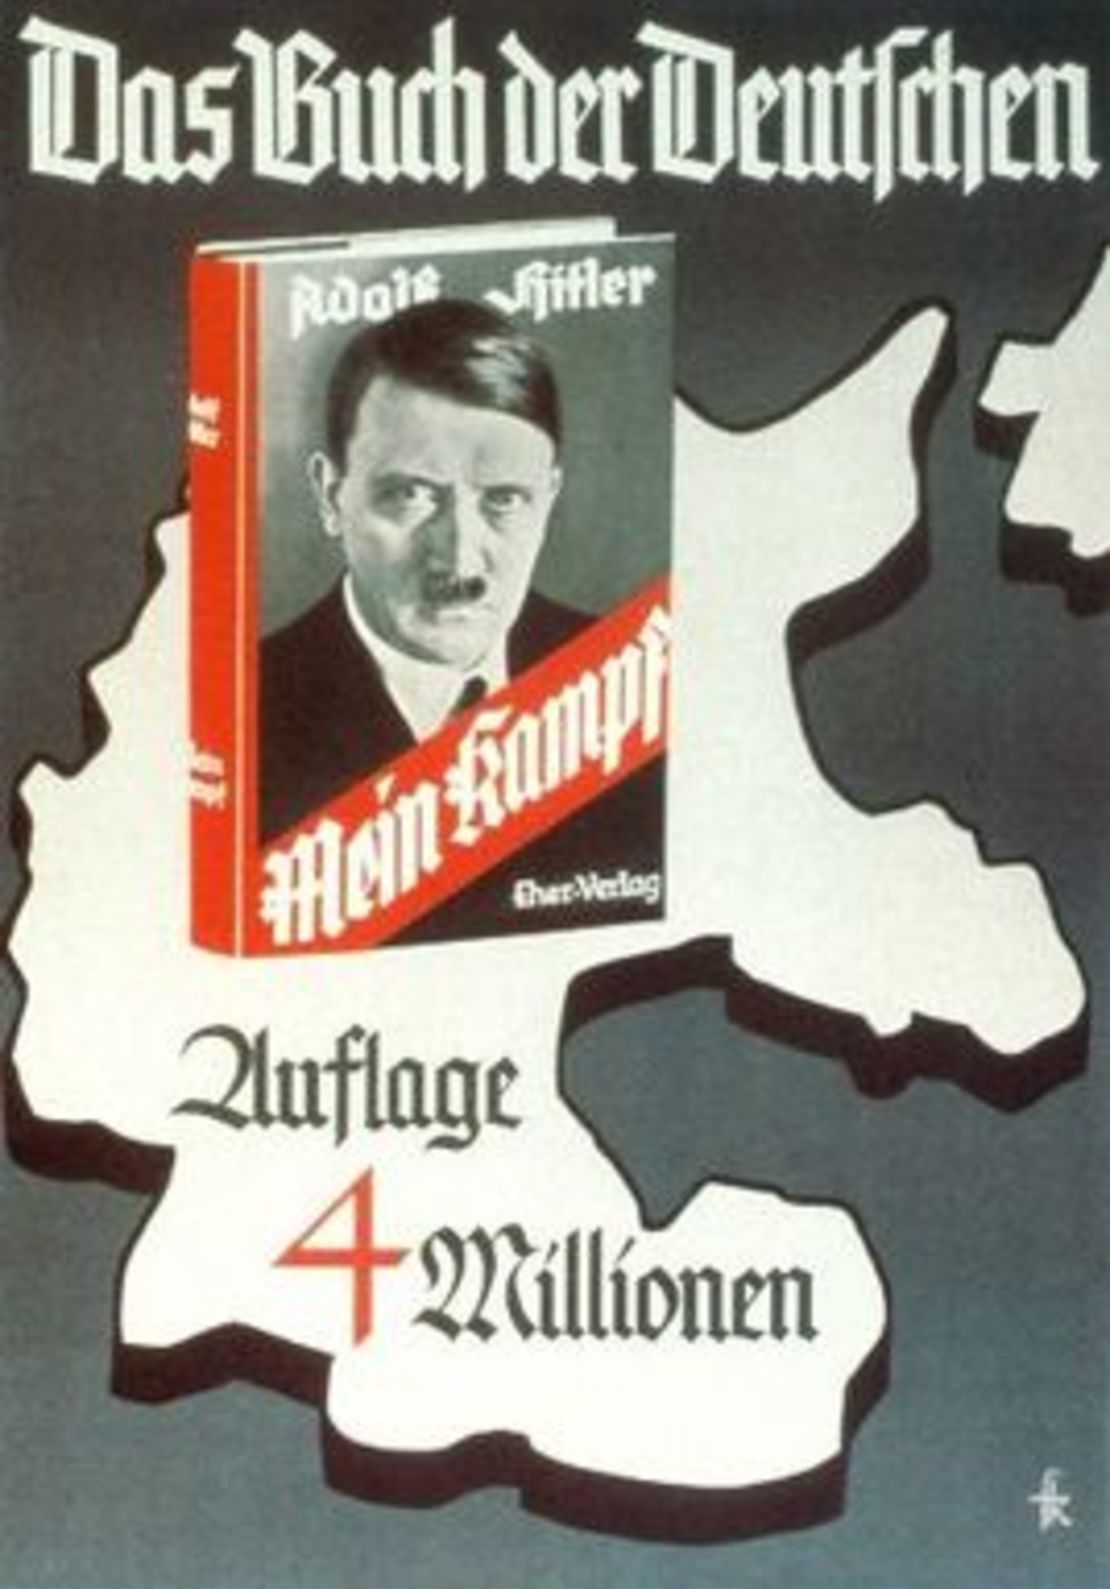 A Nazi-era poster pitches Hitler's "Mein Kampf" as "the book of Germans" and boasts 4 million copies.